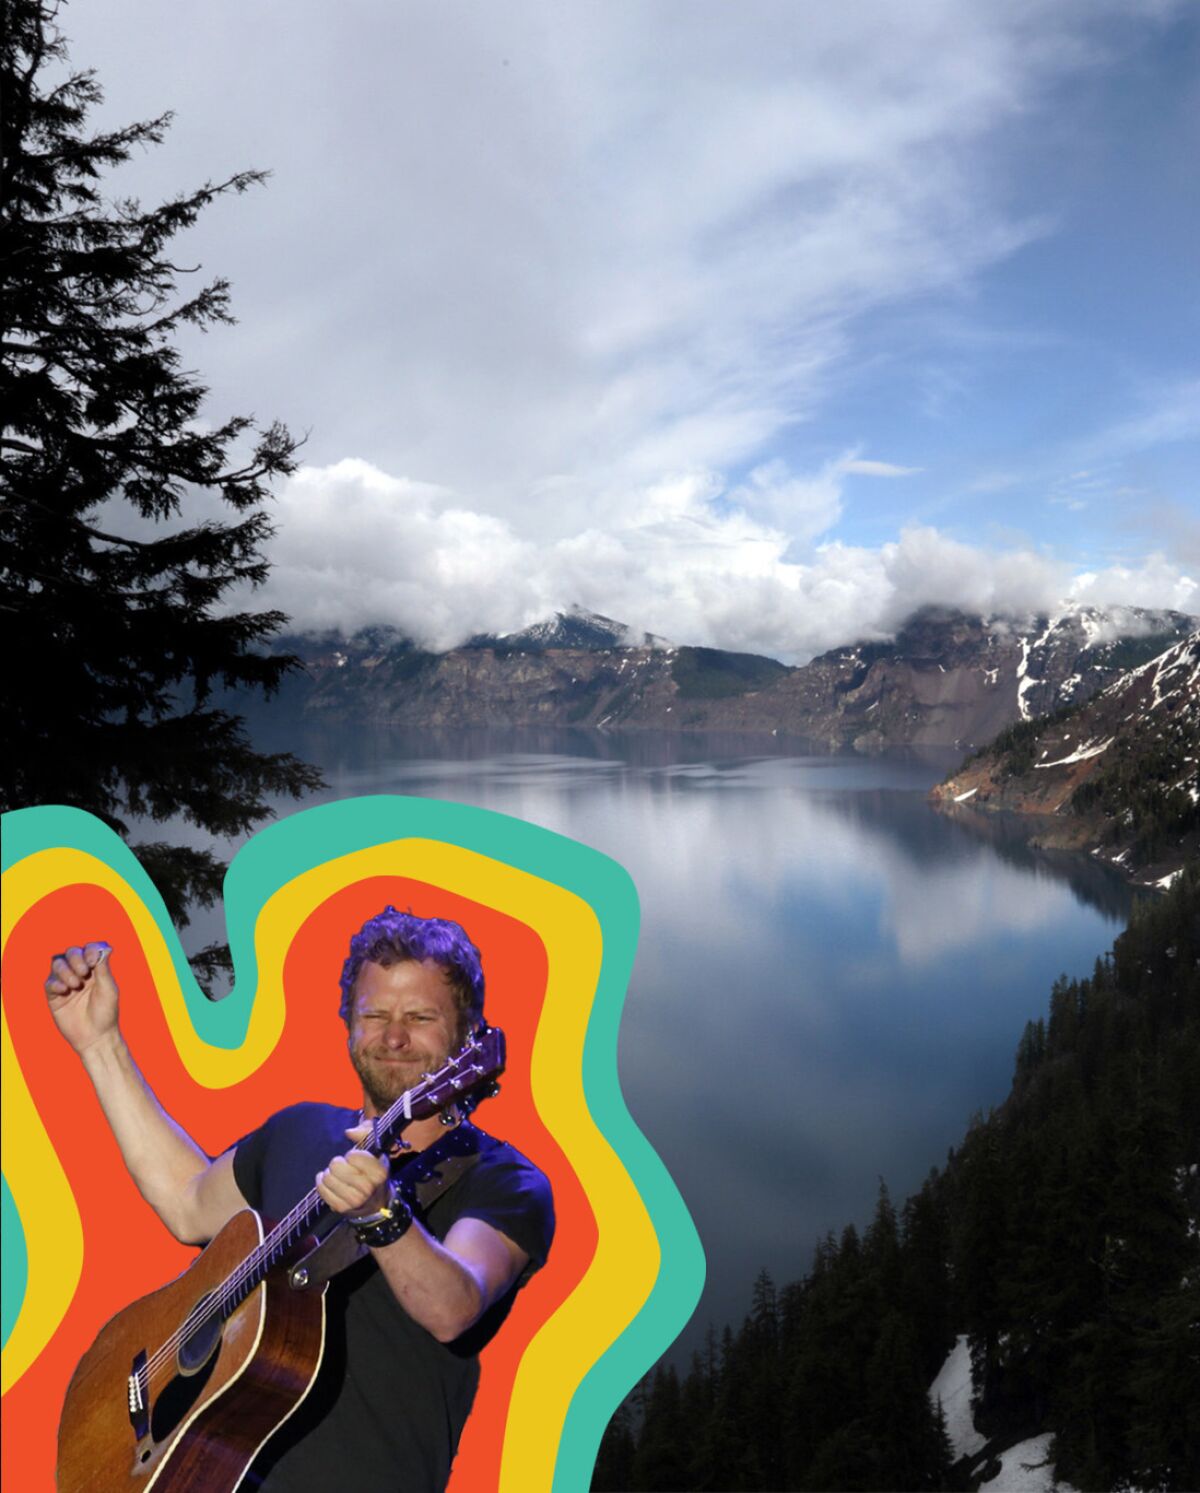 Country music star Dierks Bentley photoshopped in front of Crater Lake National Park